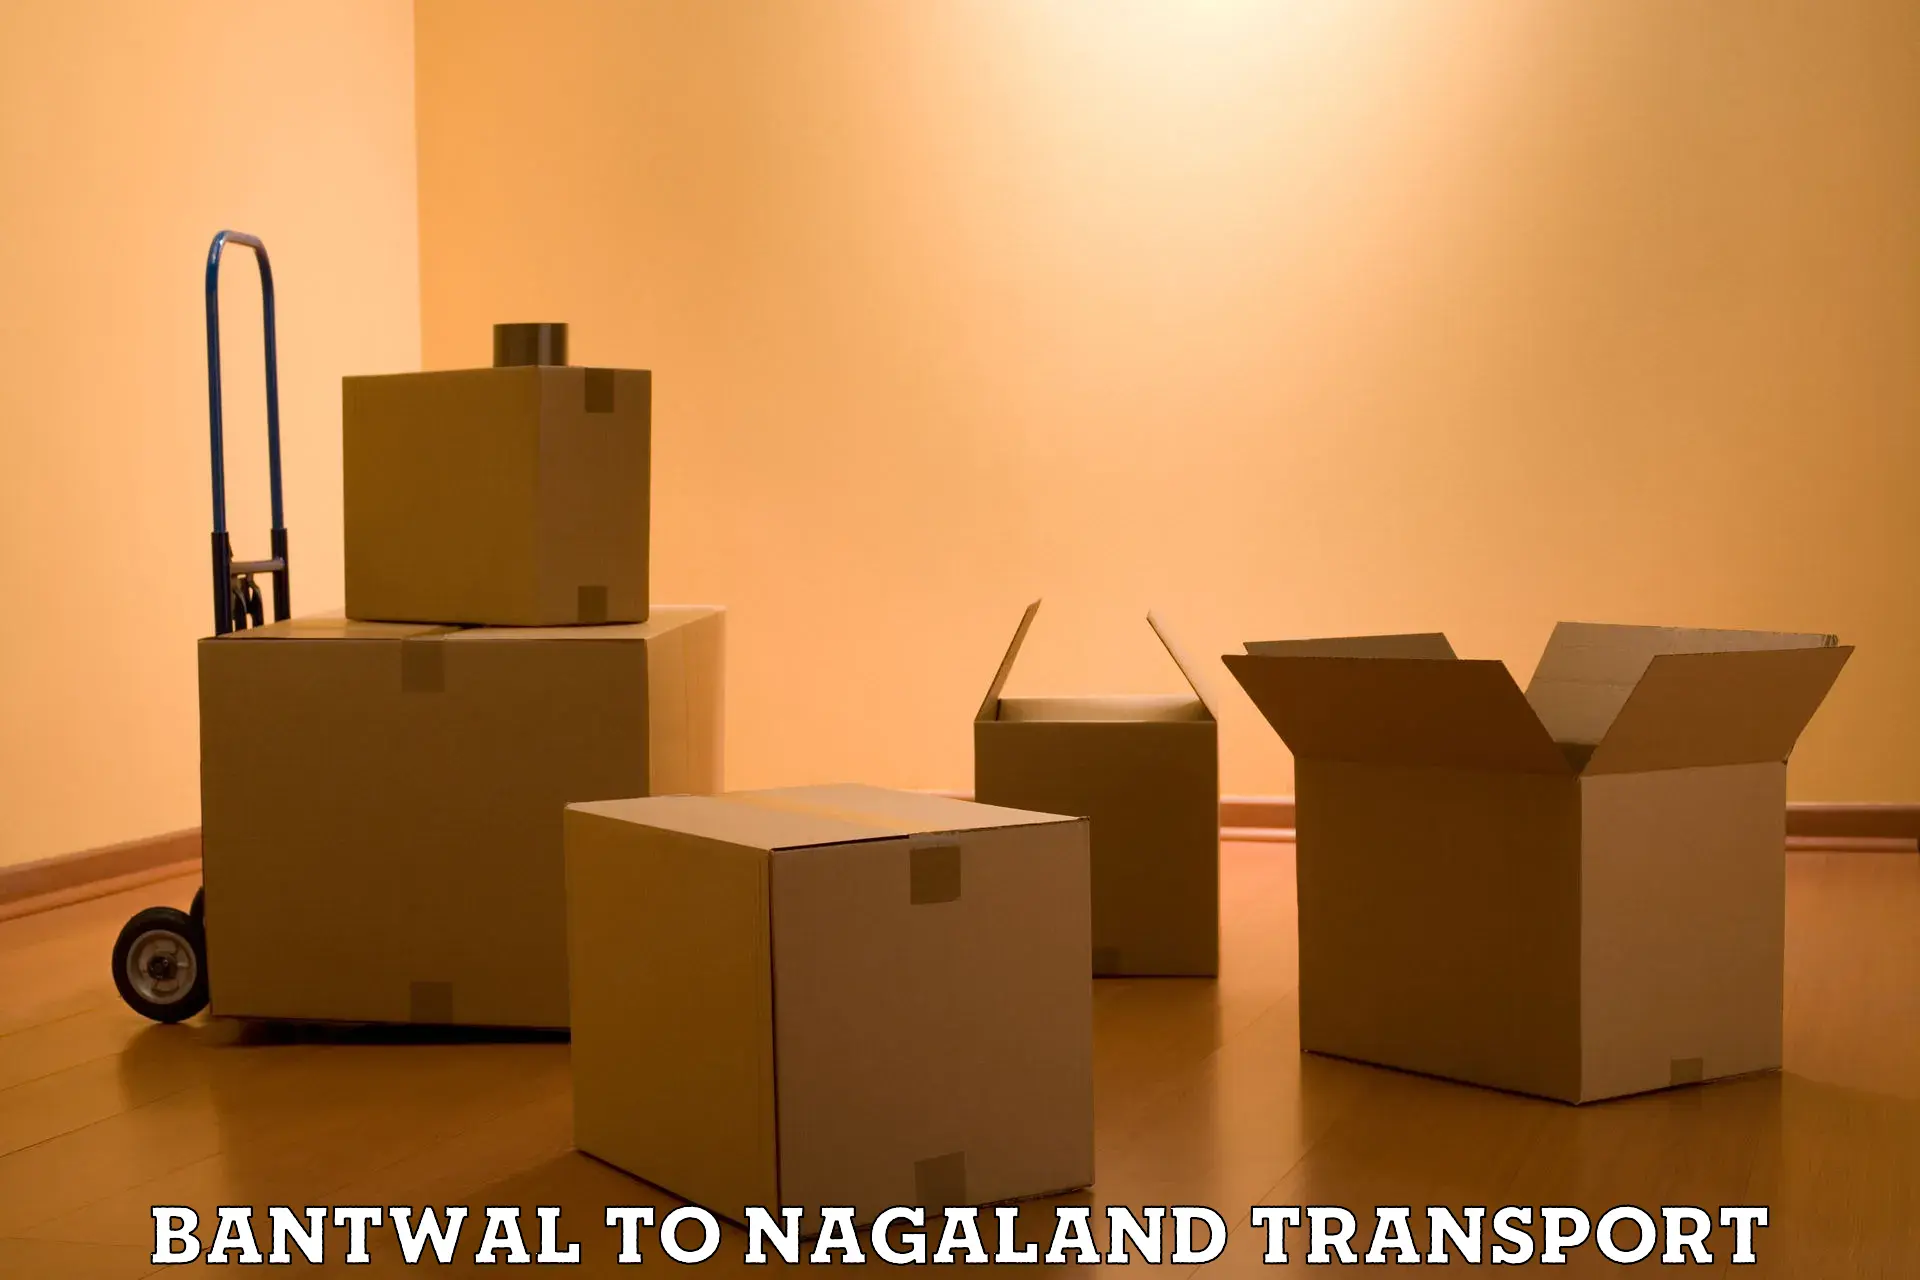 Nearby transport service Bantwal to Nagaland